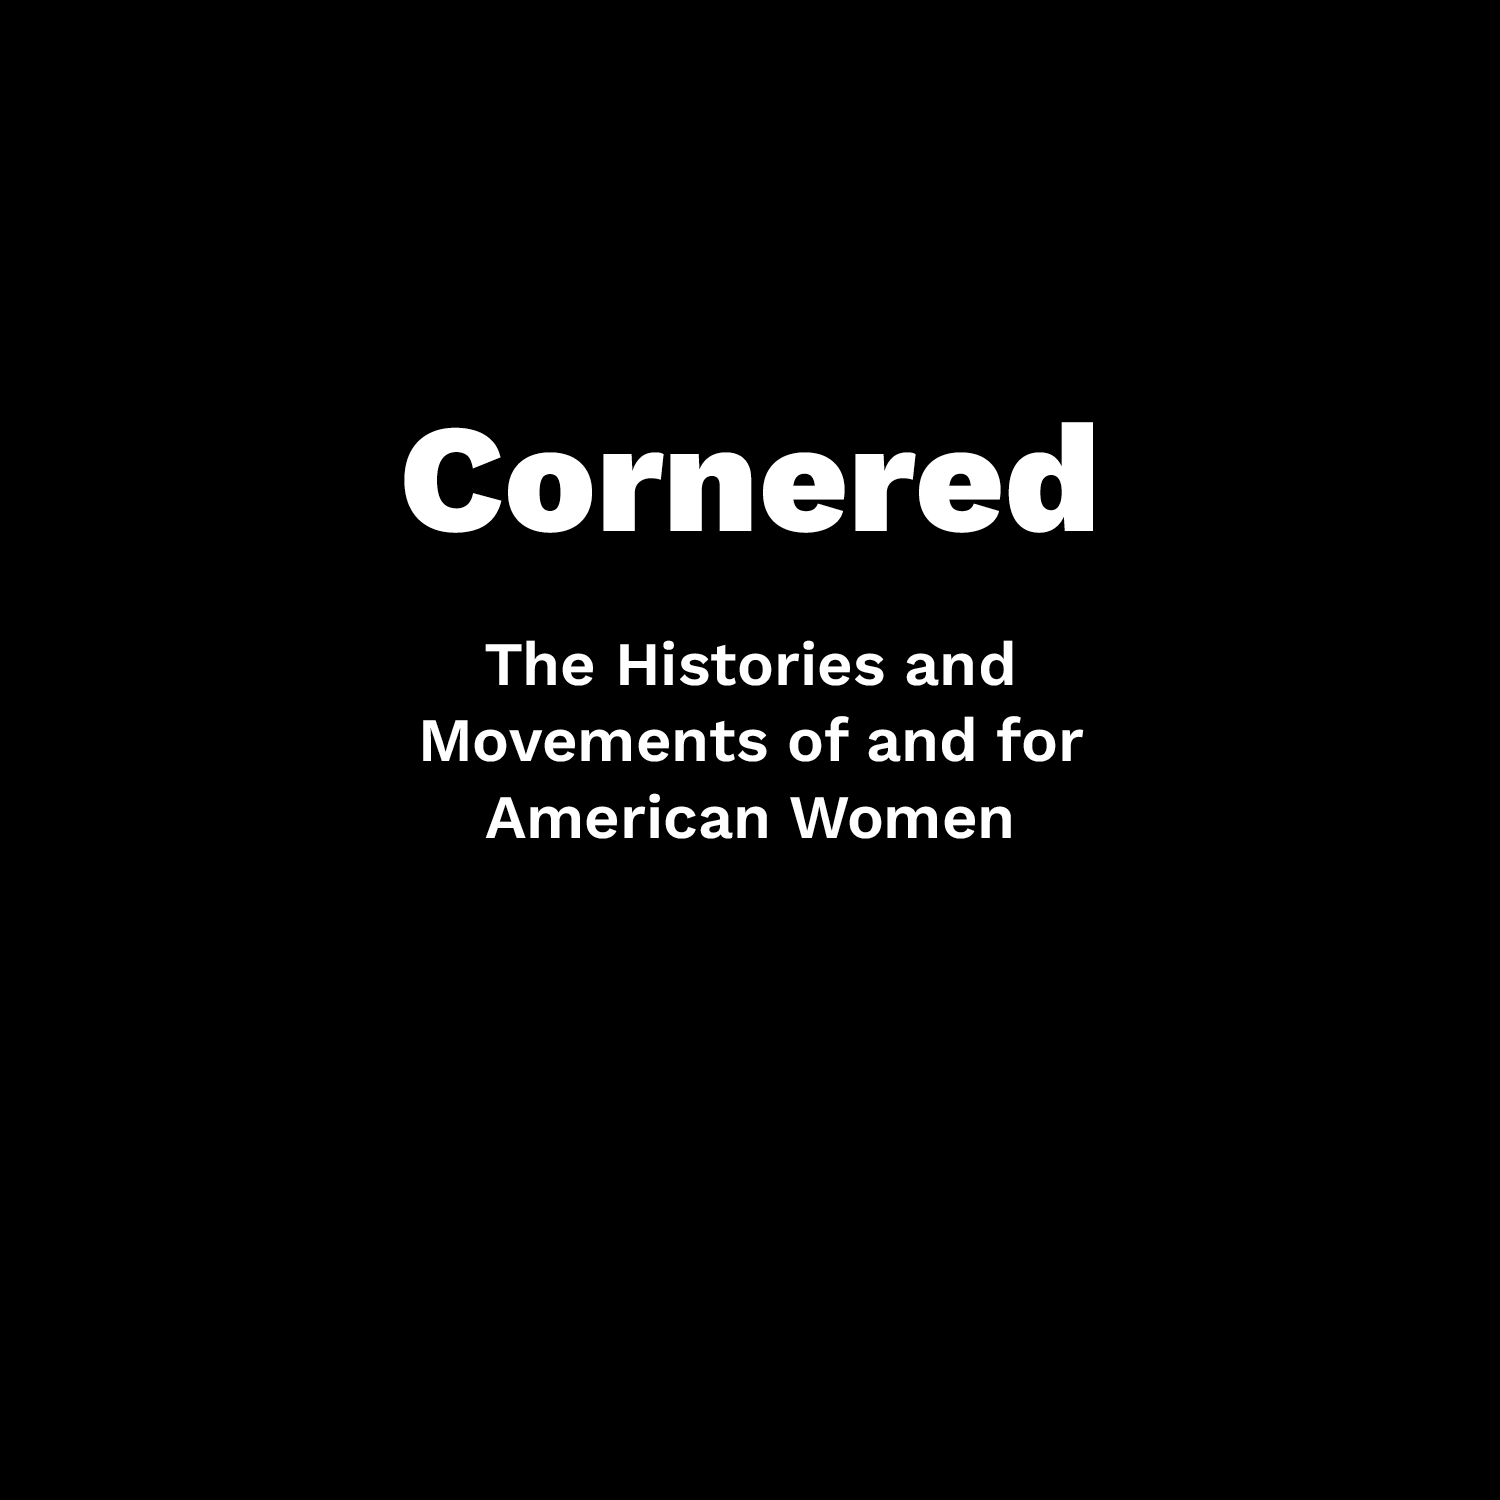 Cornered: The Histories and Movements of and for American Women